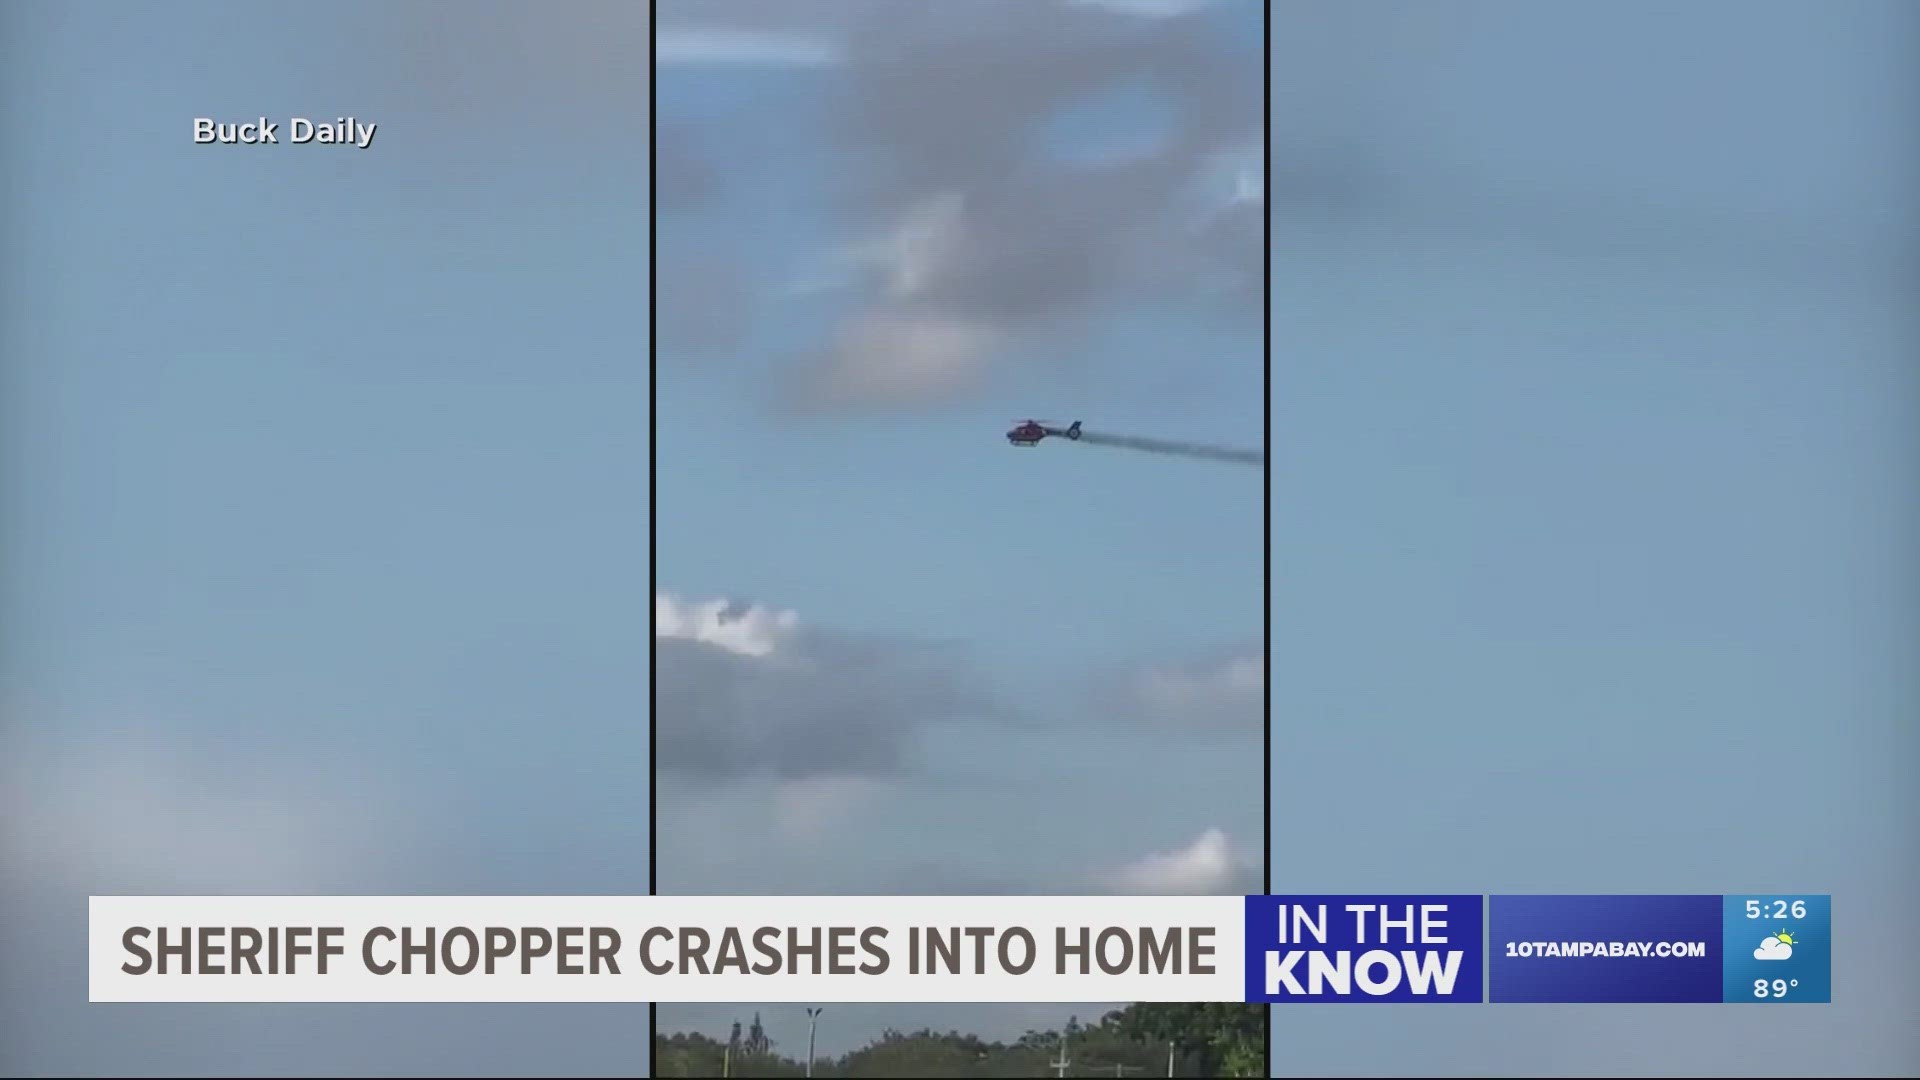 According to CBS News, the Federal Aviation Administration reports the chopper crashed into a building with three people onboard.